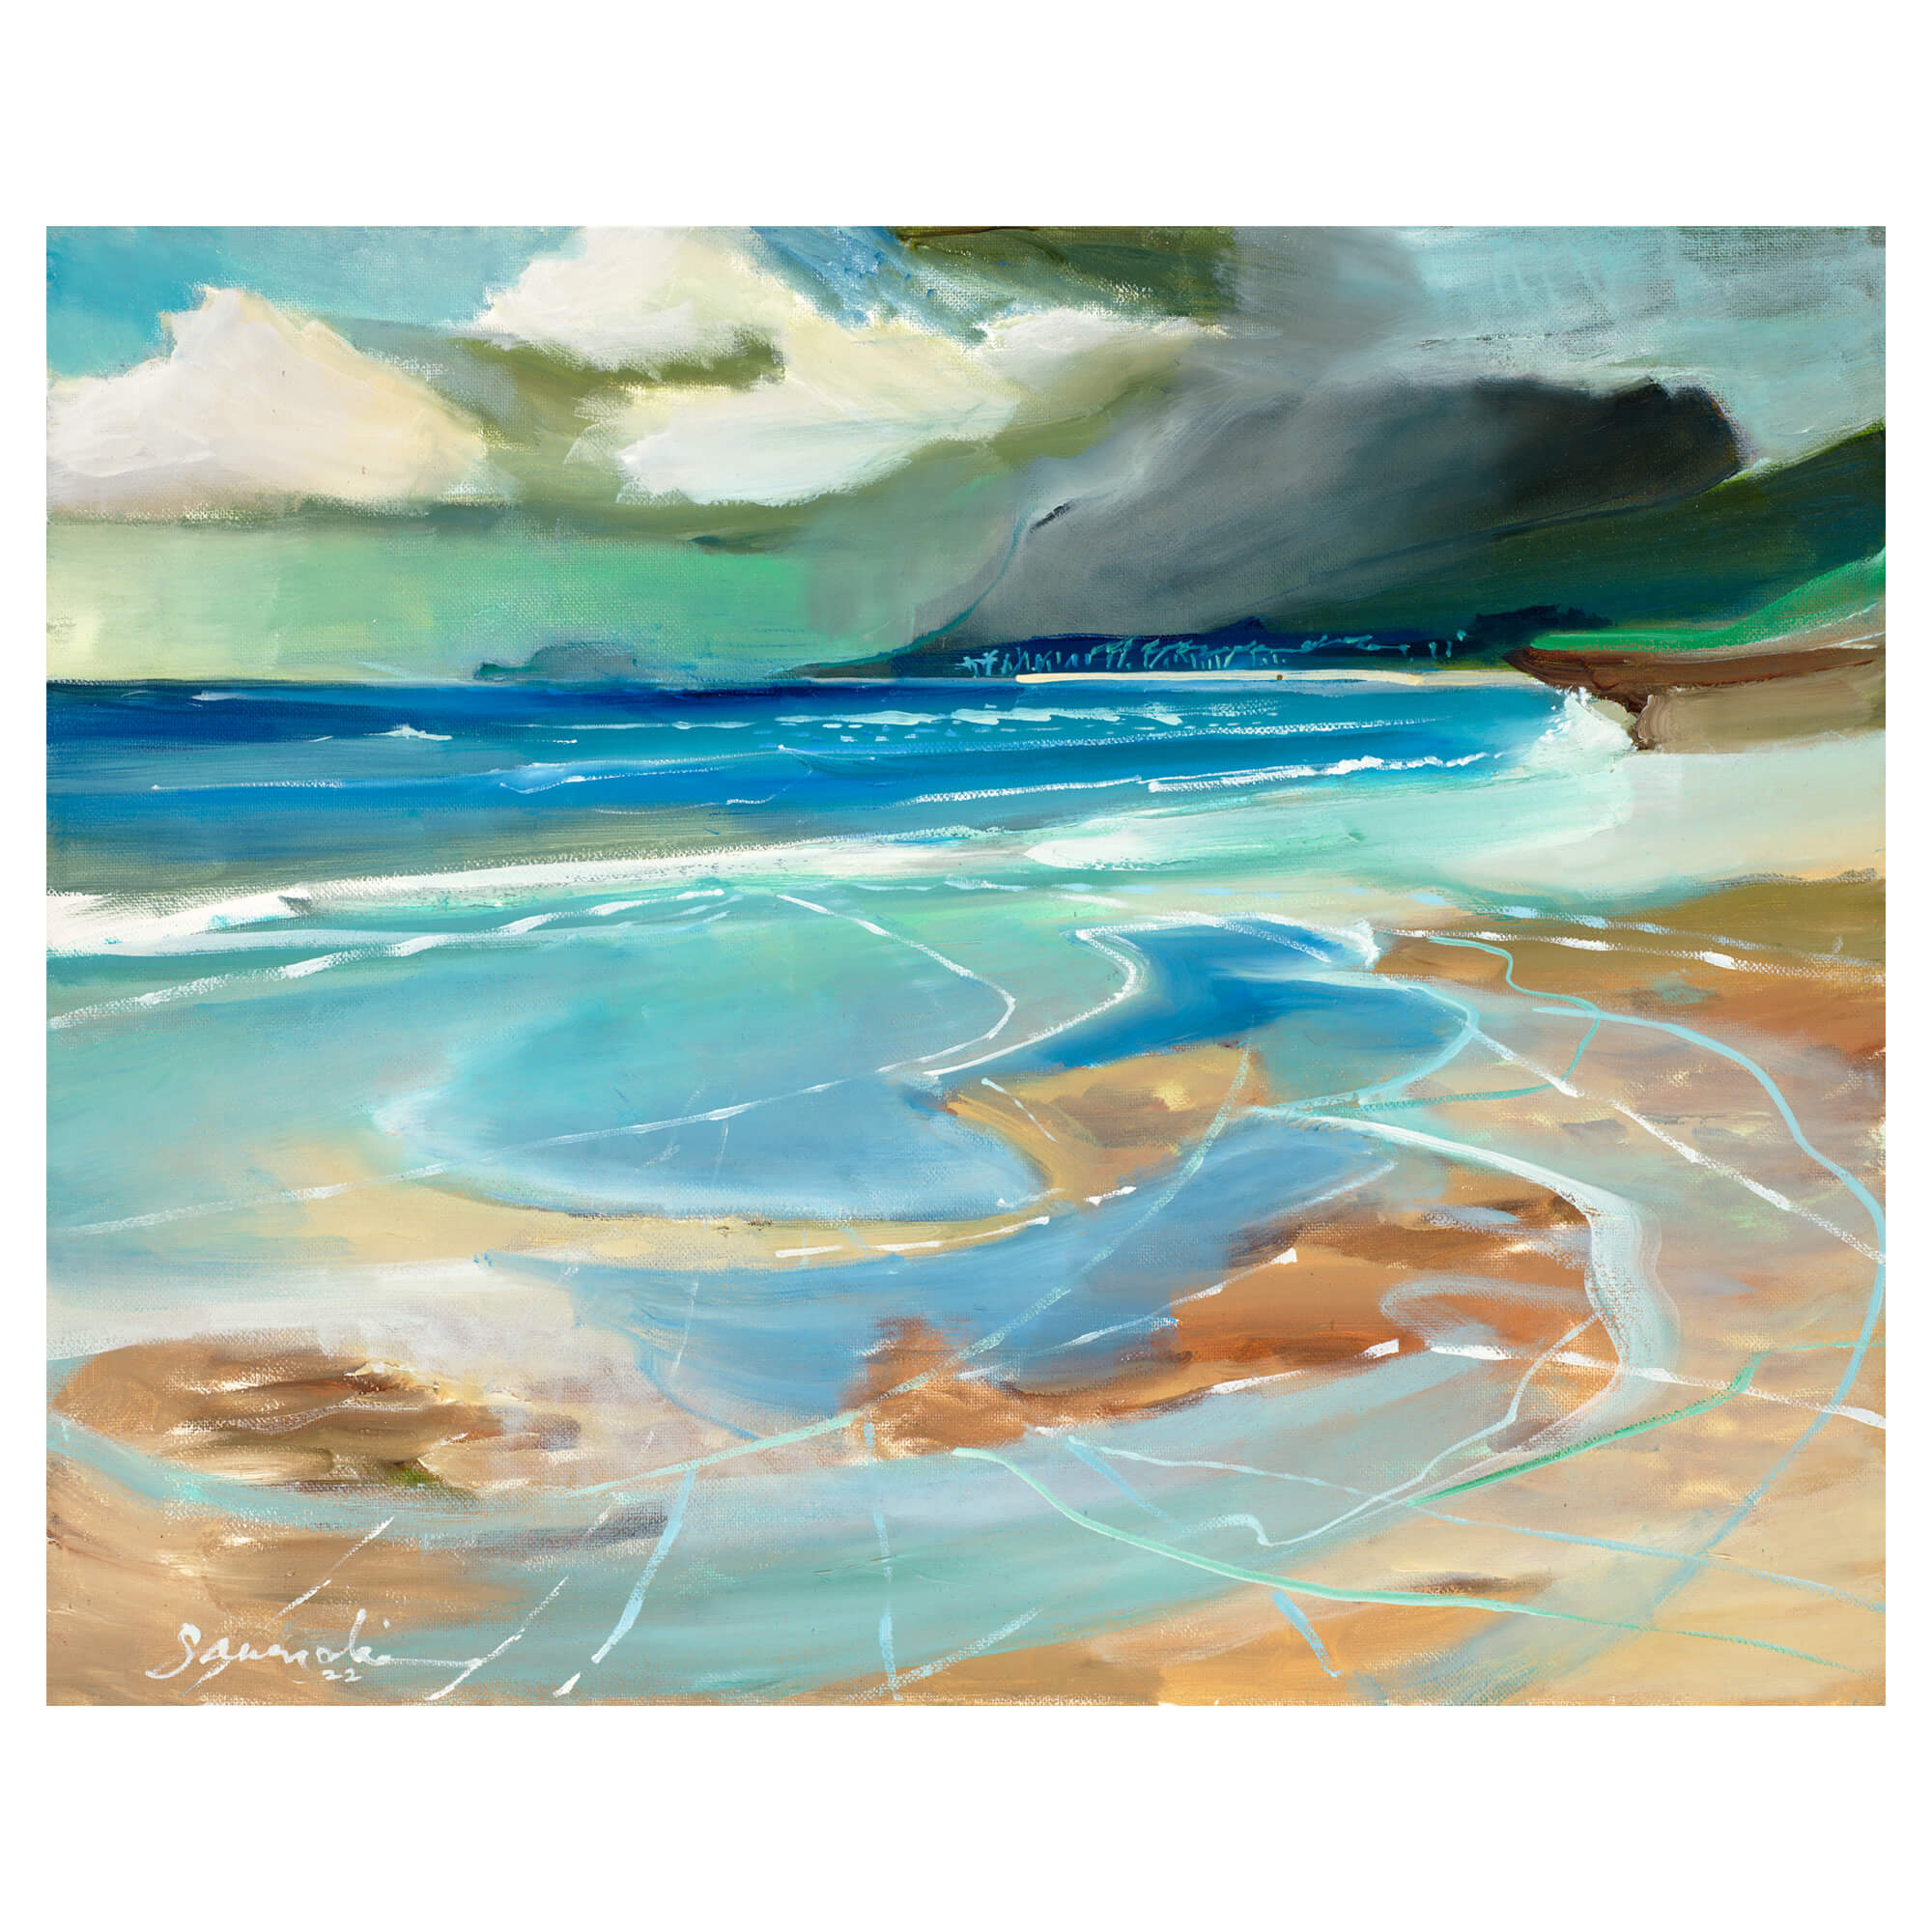 Original painting featuring an abstract serene seascape of Laie Beach using oil on canvas by famous Hawaii artist Saumolia Puapuaga